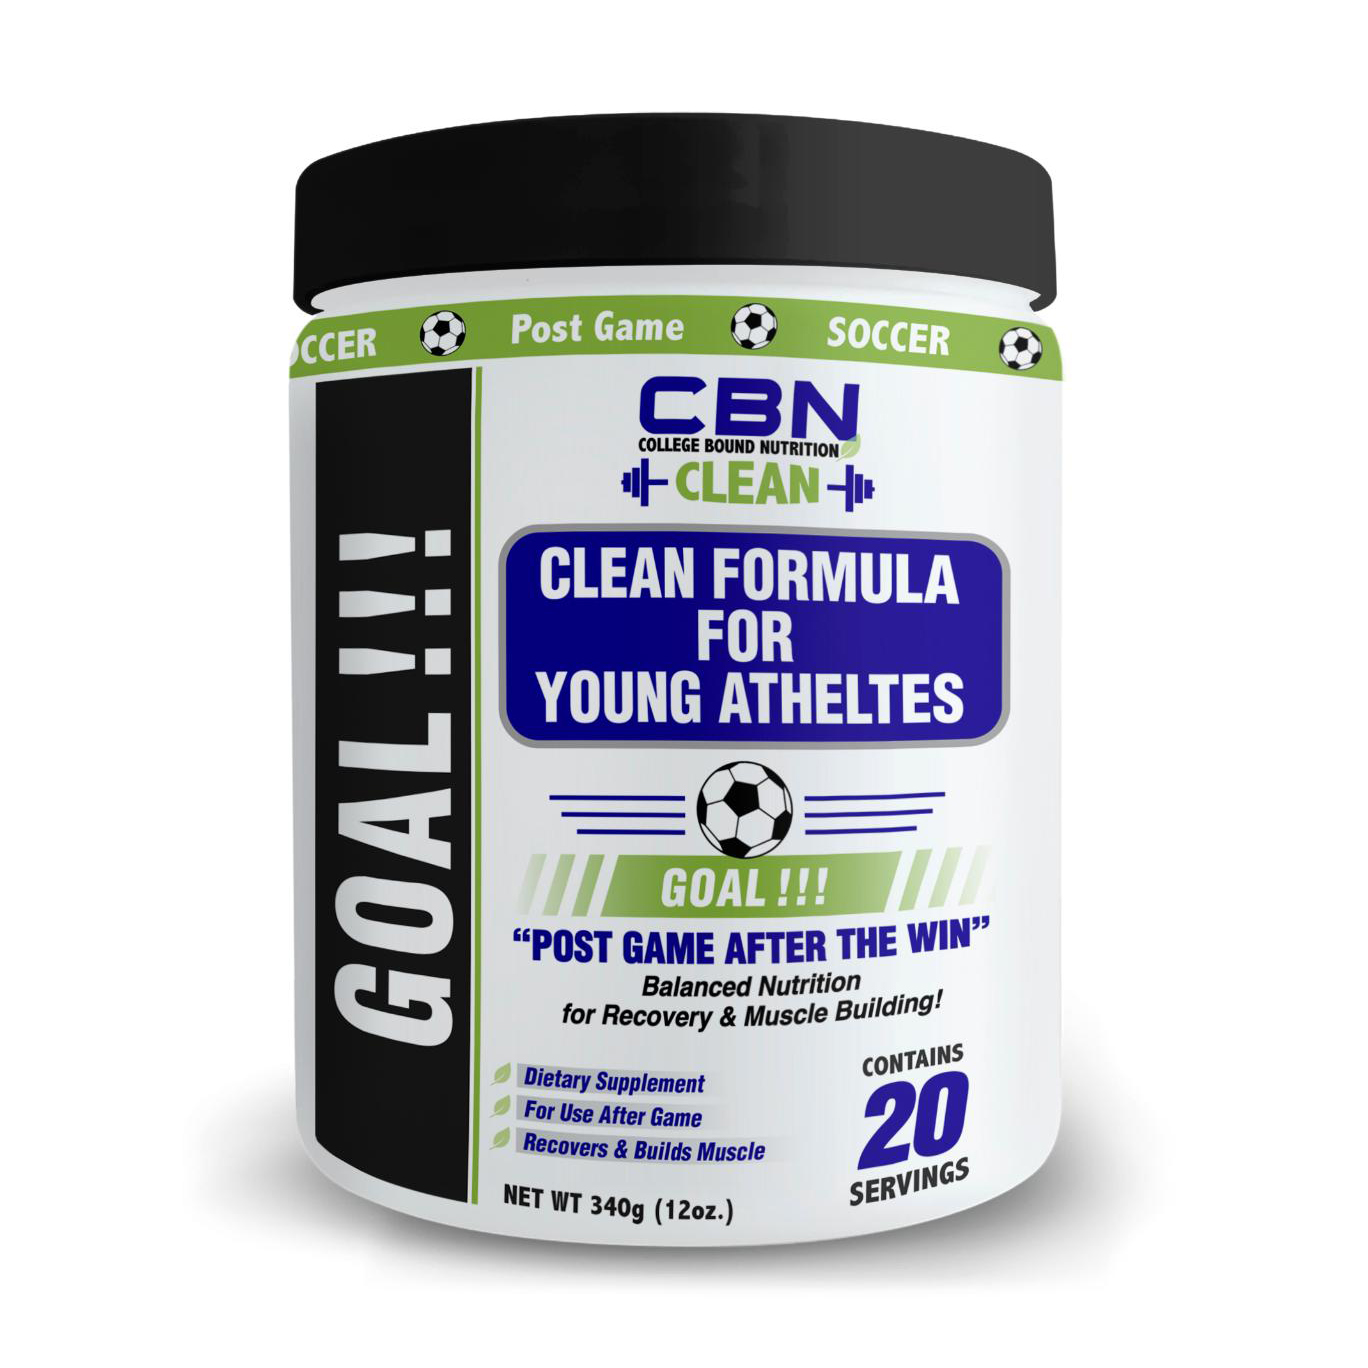 Best Preworkout for Soccer, Best Supplements for Soccer, Best Supplements for Soccer Players, Supplements for Youth Soccer Players, Best Supplements for Youth Soccer Players, Best Protein for teen Soccer Players,